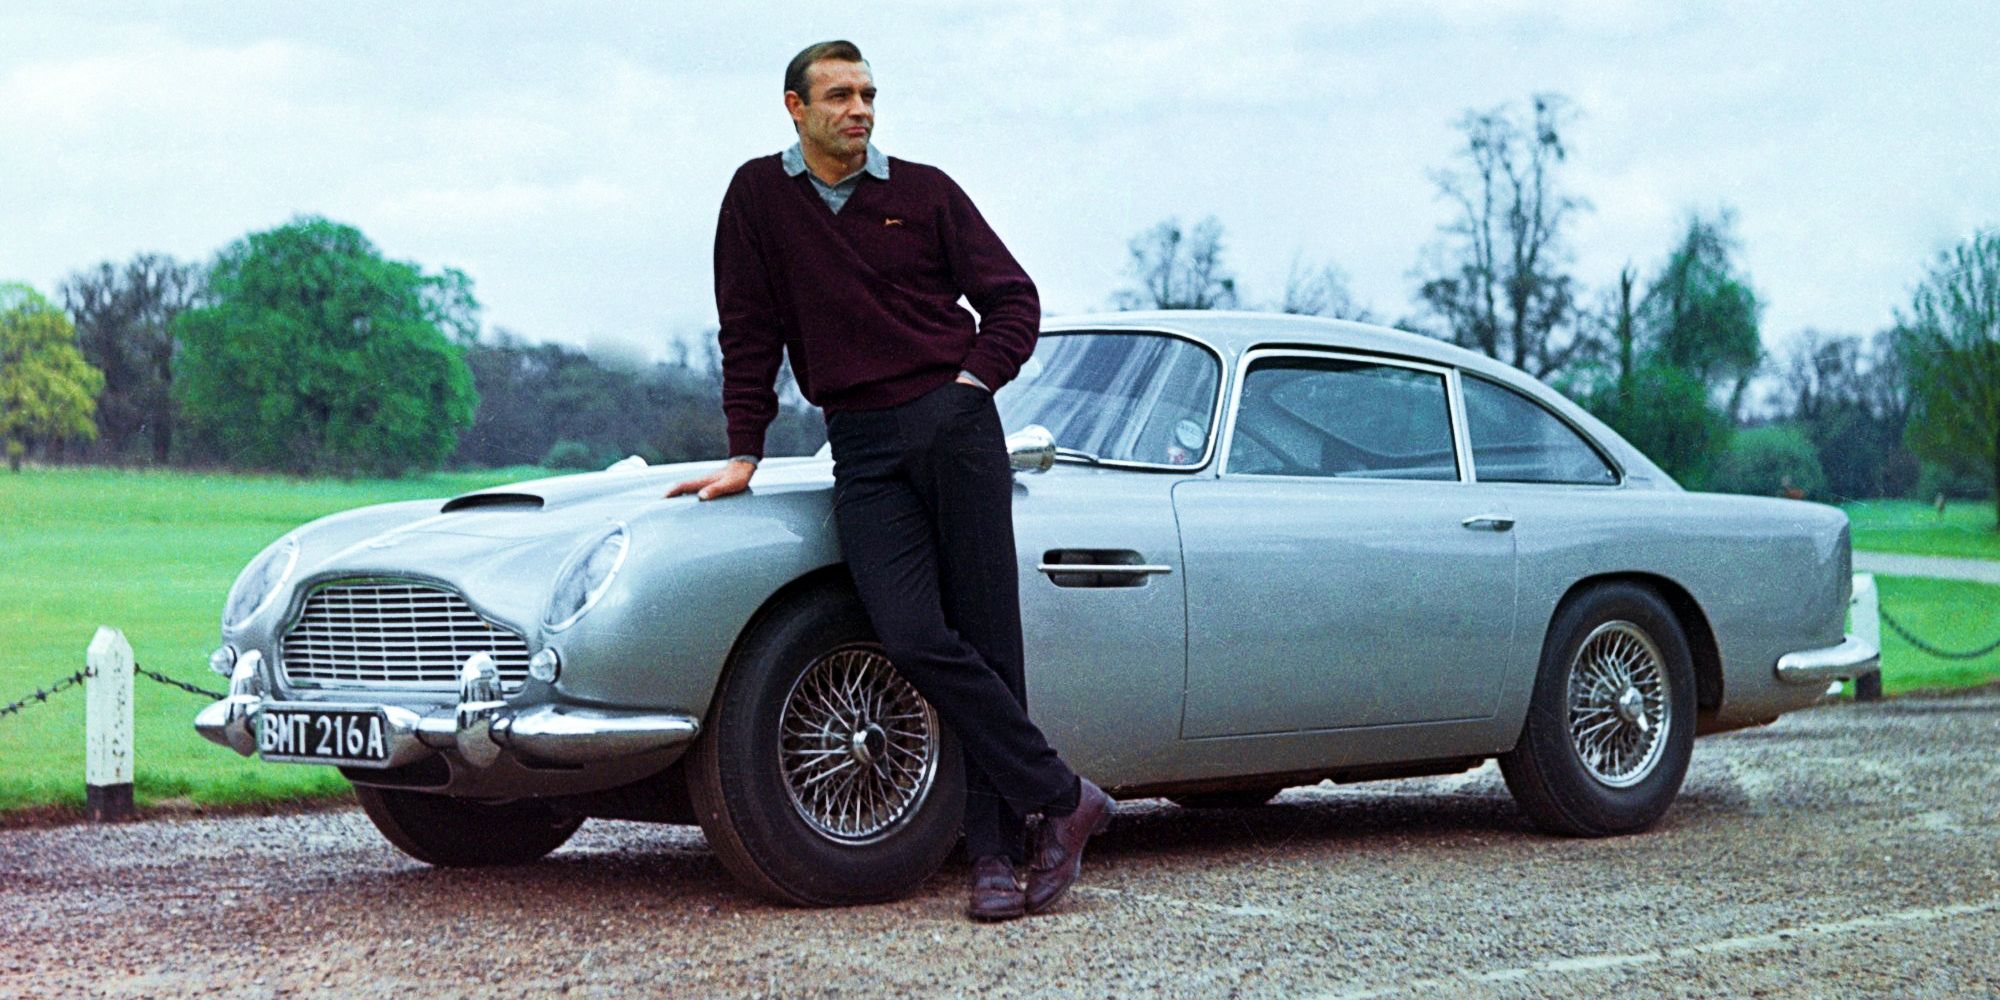 James Bond Actor Sean Connery standing in front of an Aston Martin